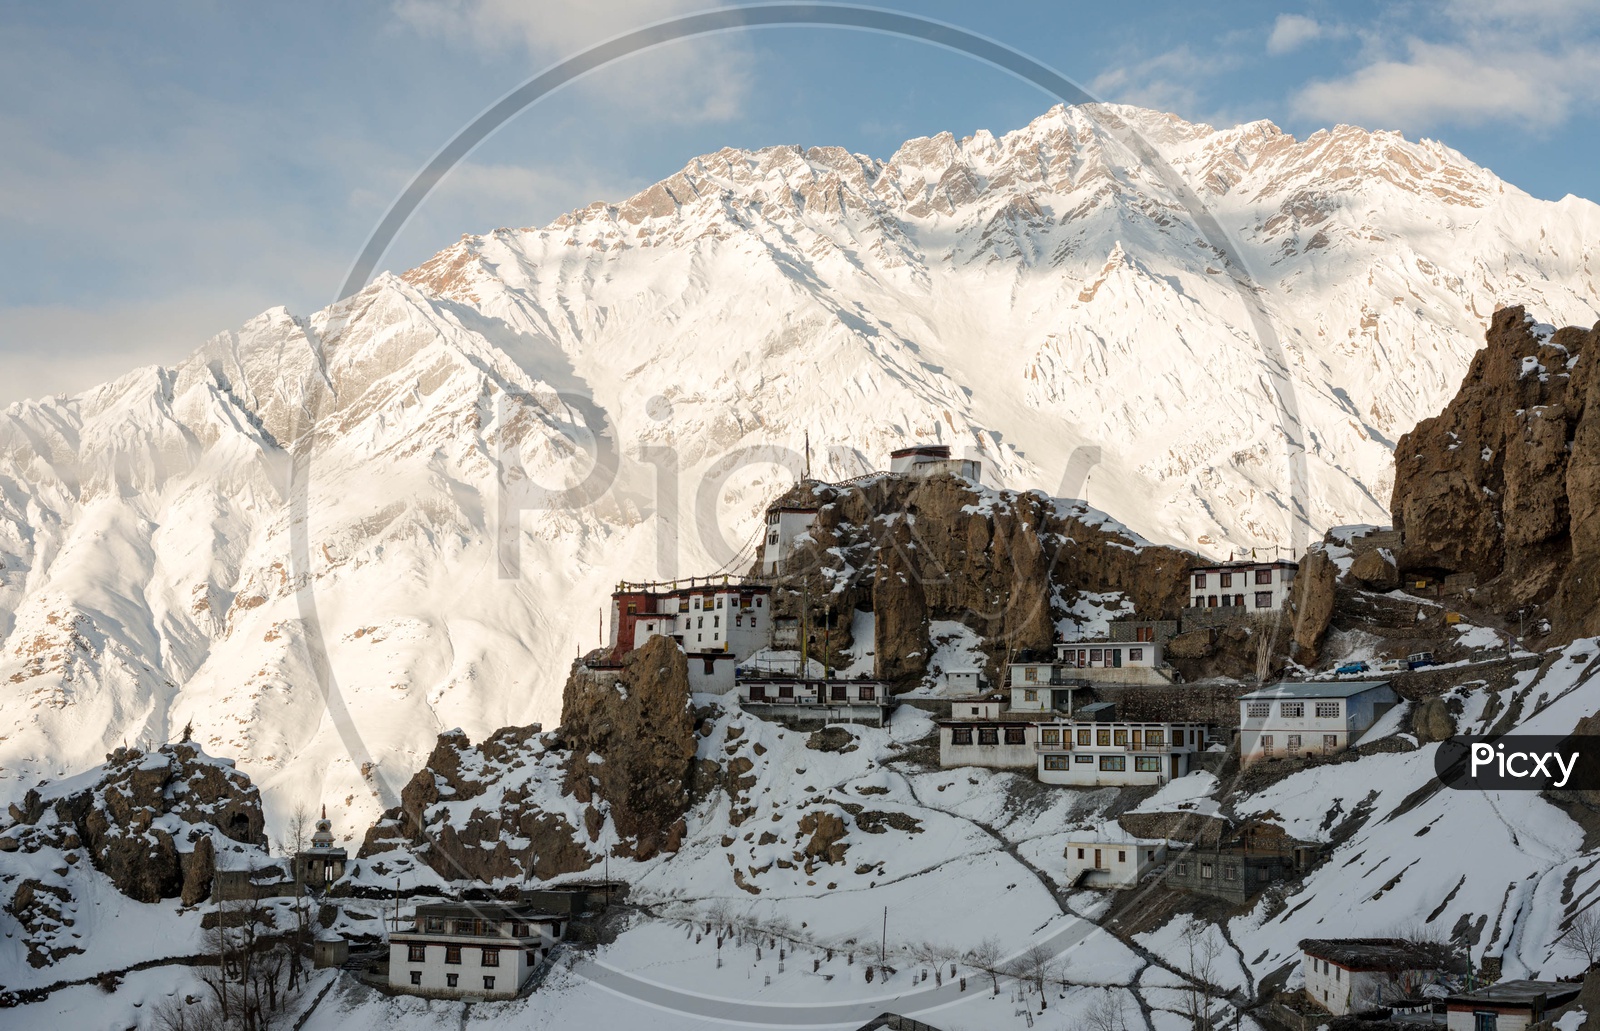 Dhankar Village on Mountains in Winter Season with Snow Capped Himalayan Mountain Range in Background